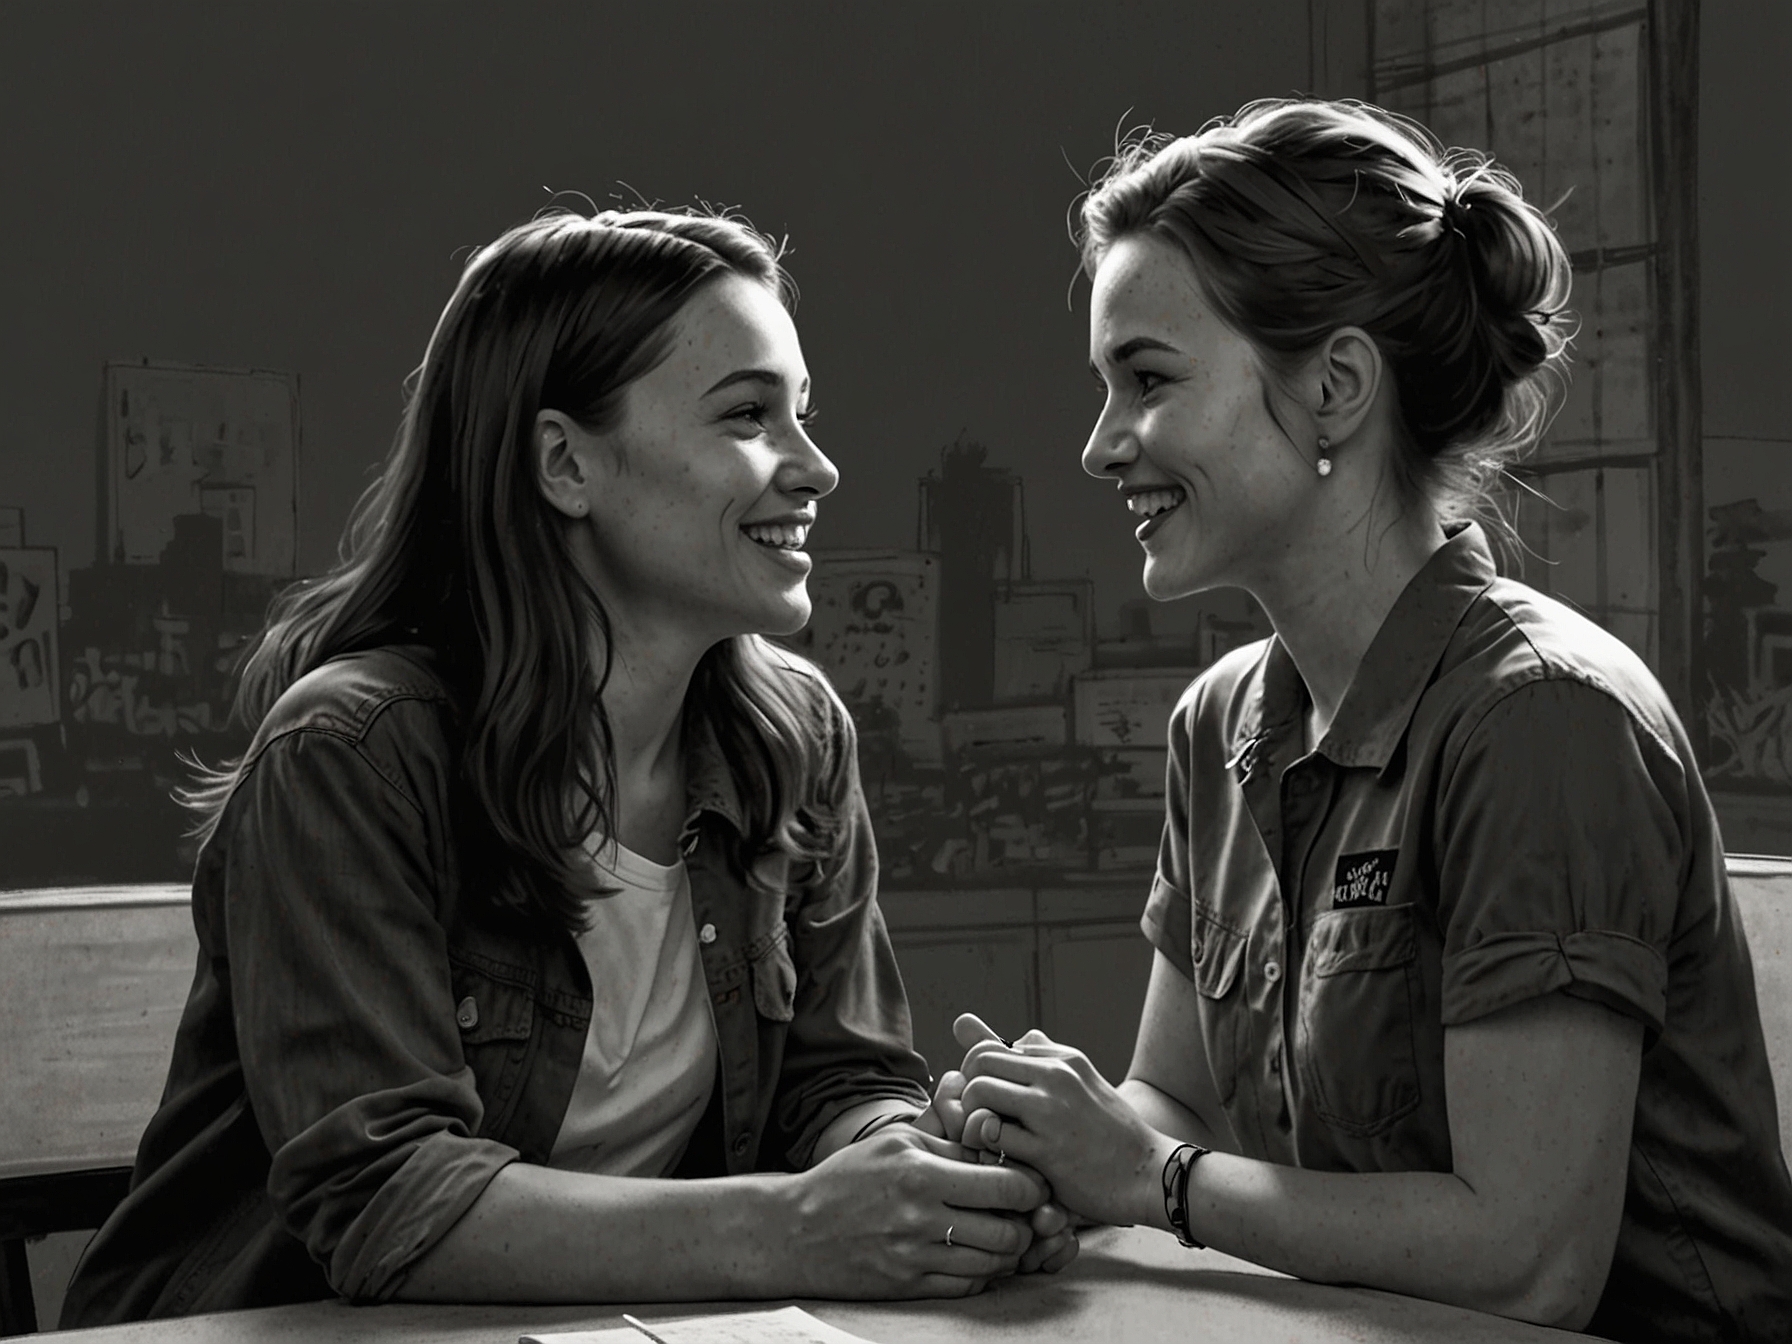 A candid moment between Sydney Martin and co-star Jane Doe, highlighting their off-screen friendship that enhances their on-screen chemistry and makes their scenes more authentic.